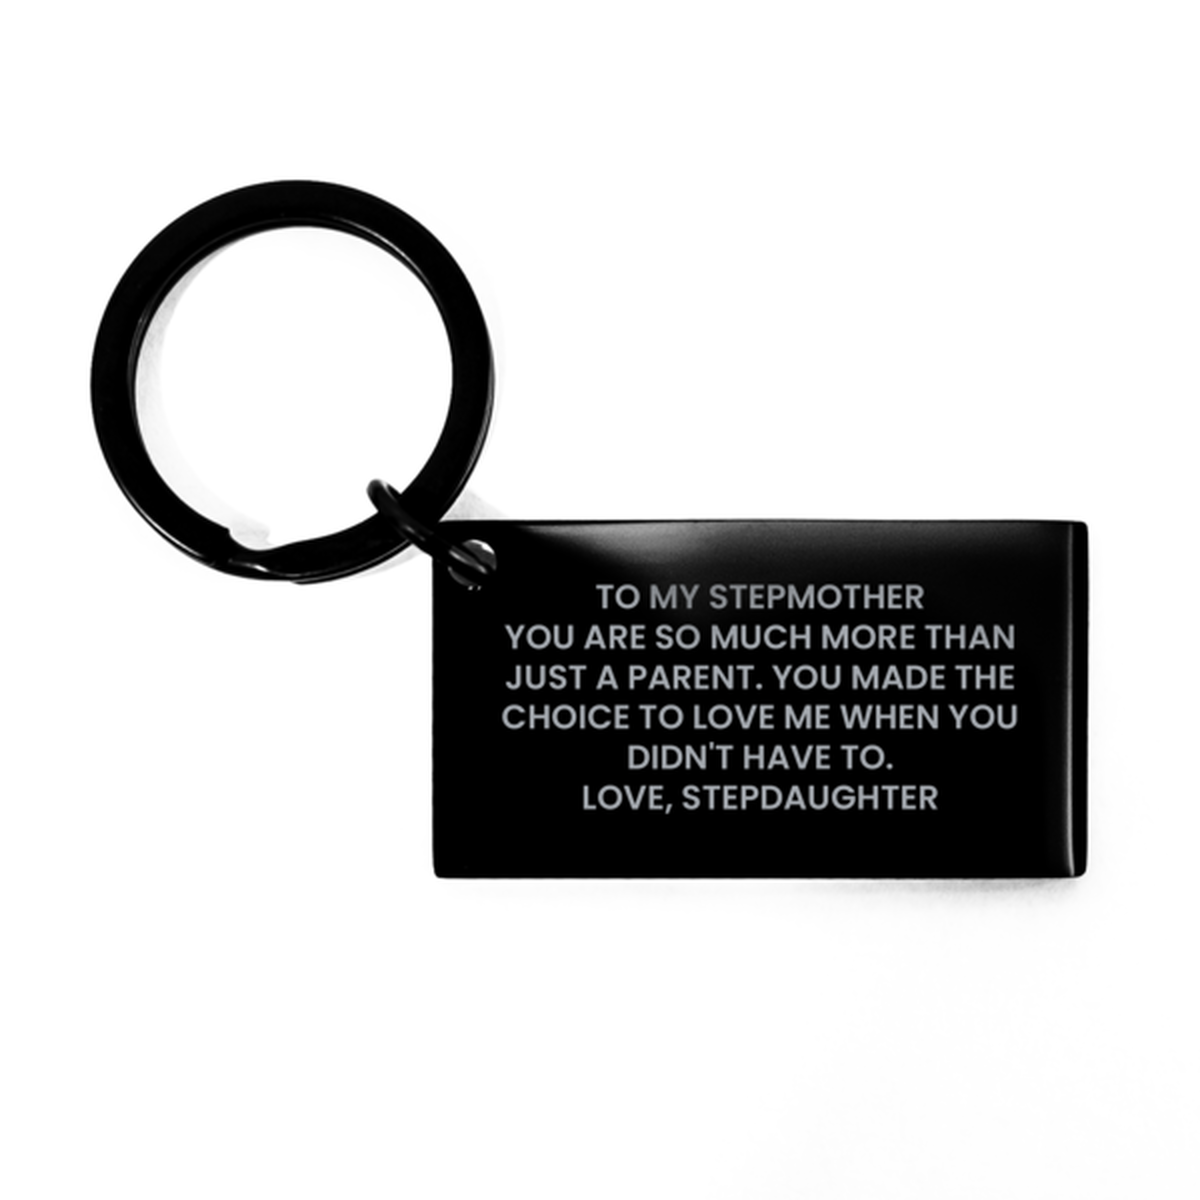 To My Stepmother Black Keychain, Just A Parent, Mothers Day Gifts For Stepmother From Stepdaughter, Birthday Gifts For Women